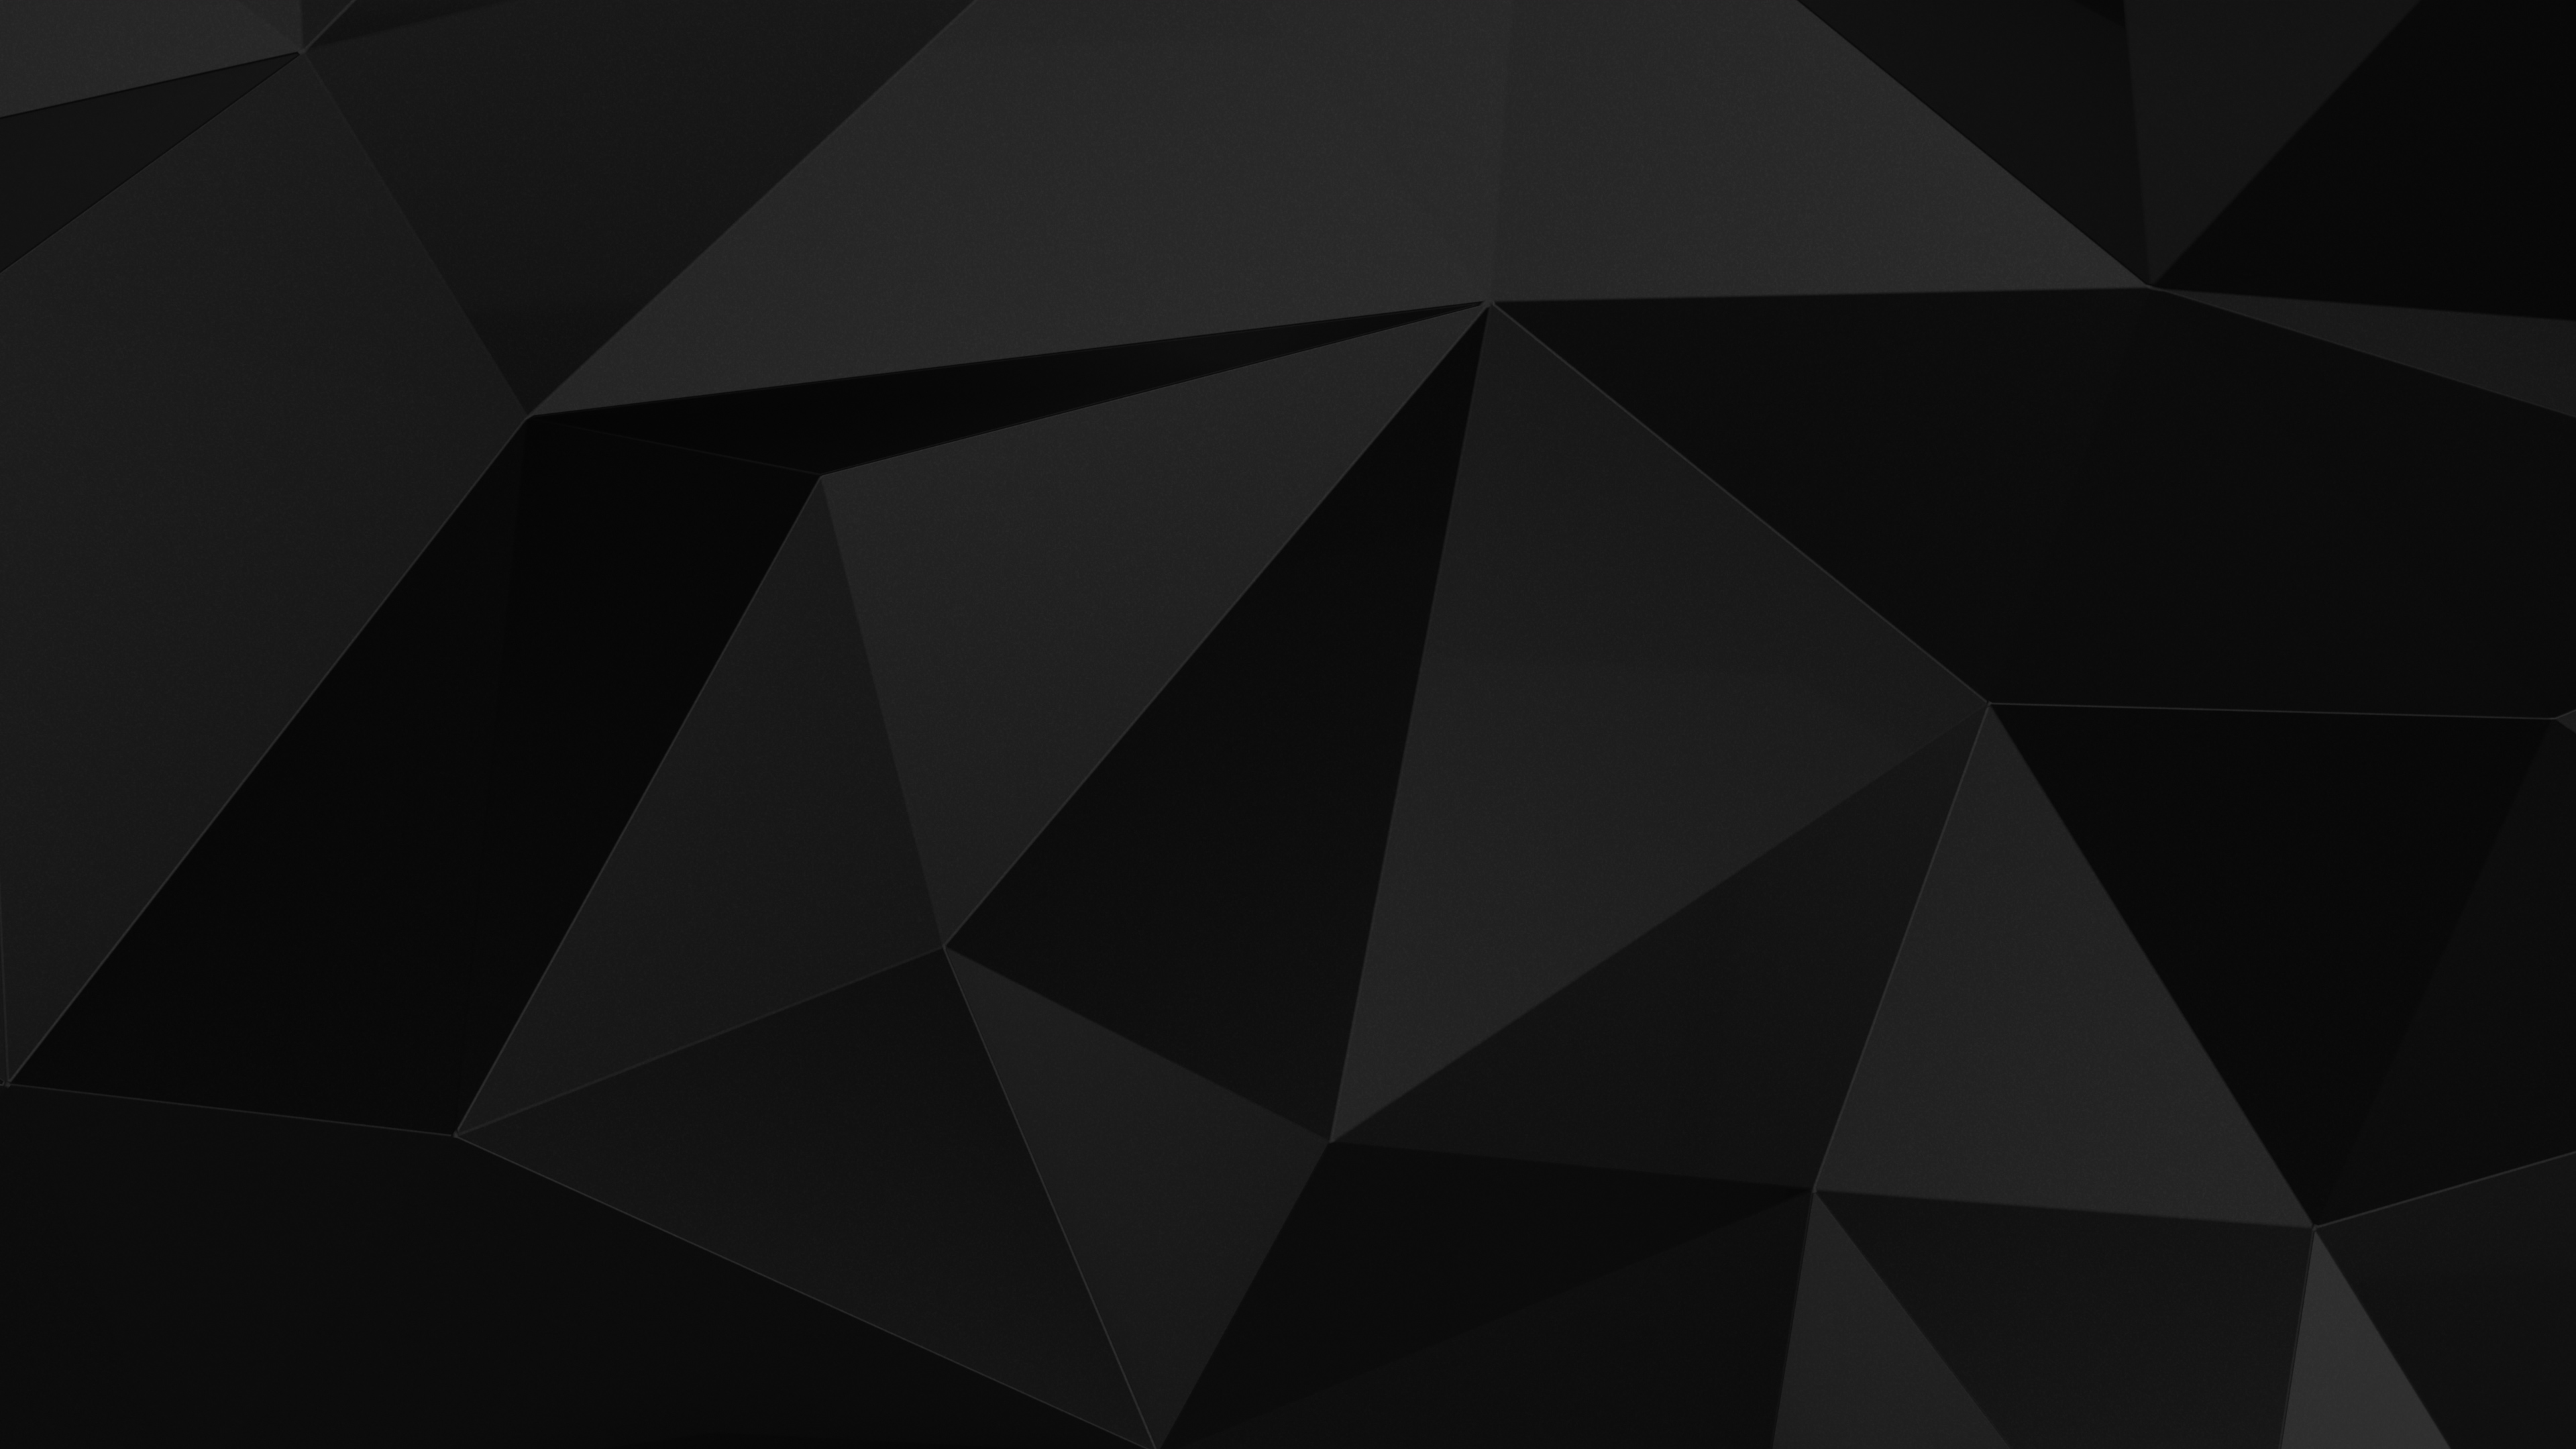 Wallpapers abstraction darkness black on the desktop